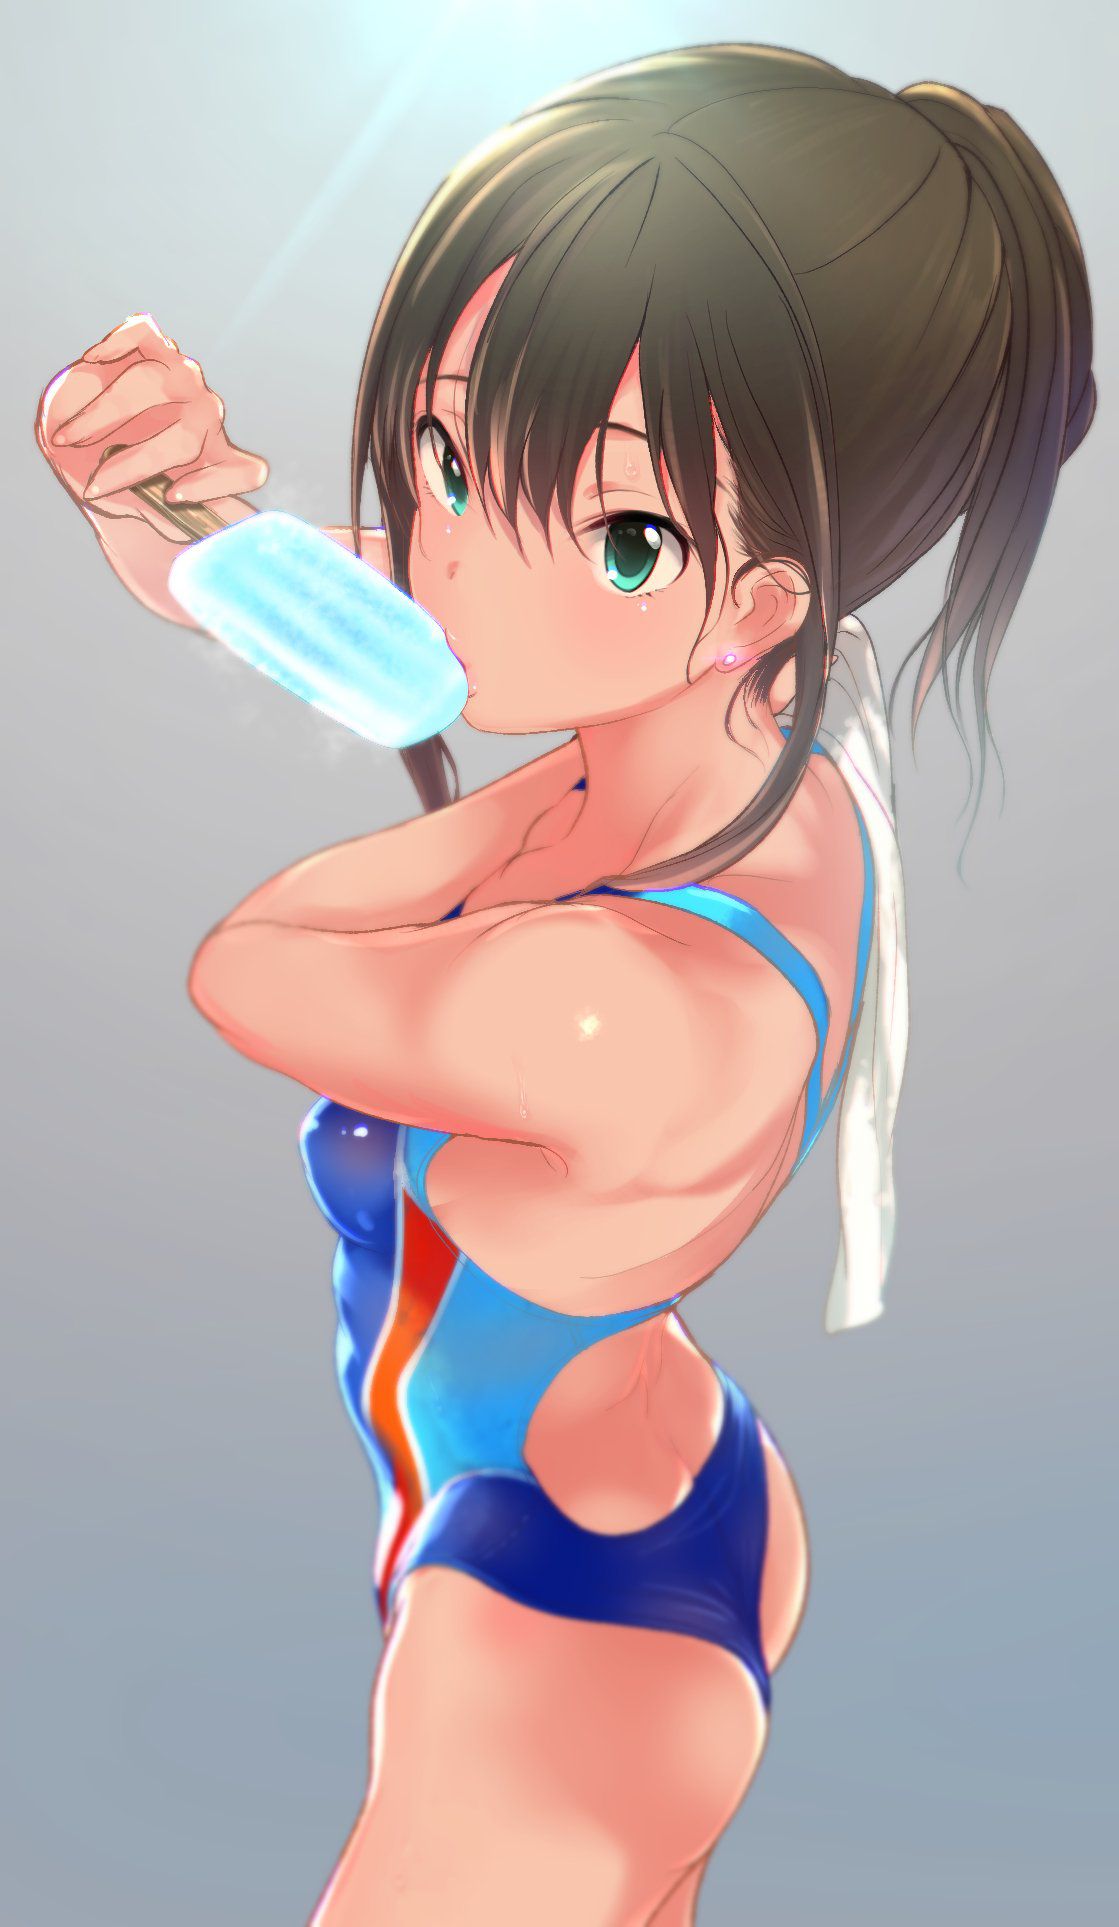 [2nd] Second erotic image of a girl wearing a swimming swimsuit 5 [competition swimsuit] 14